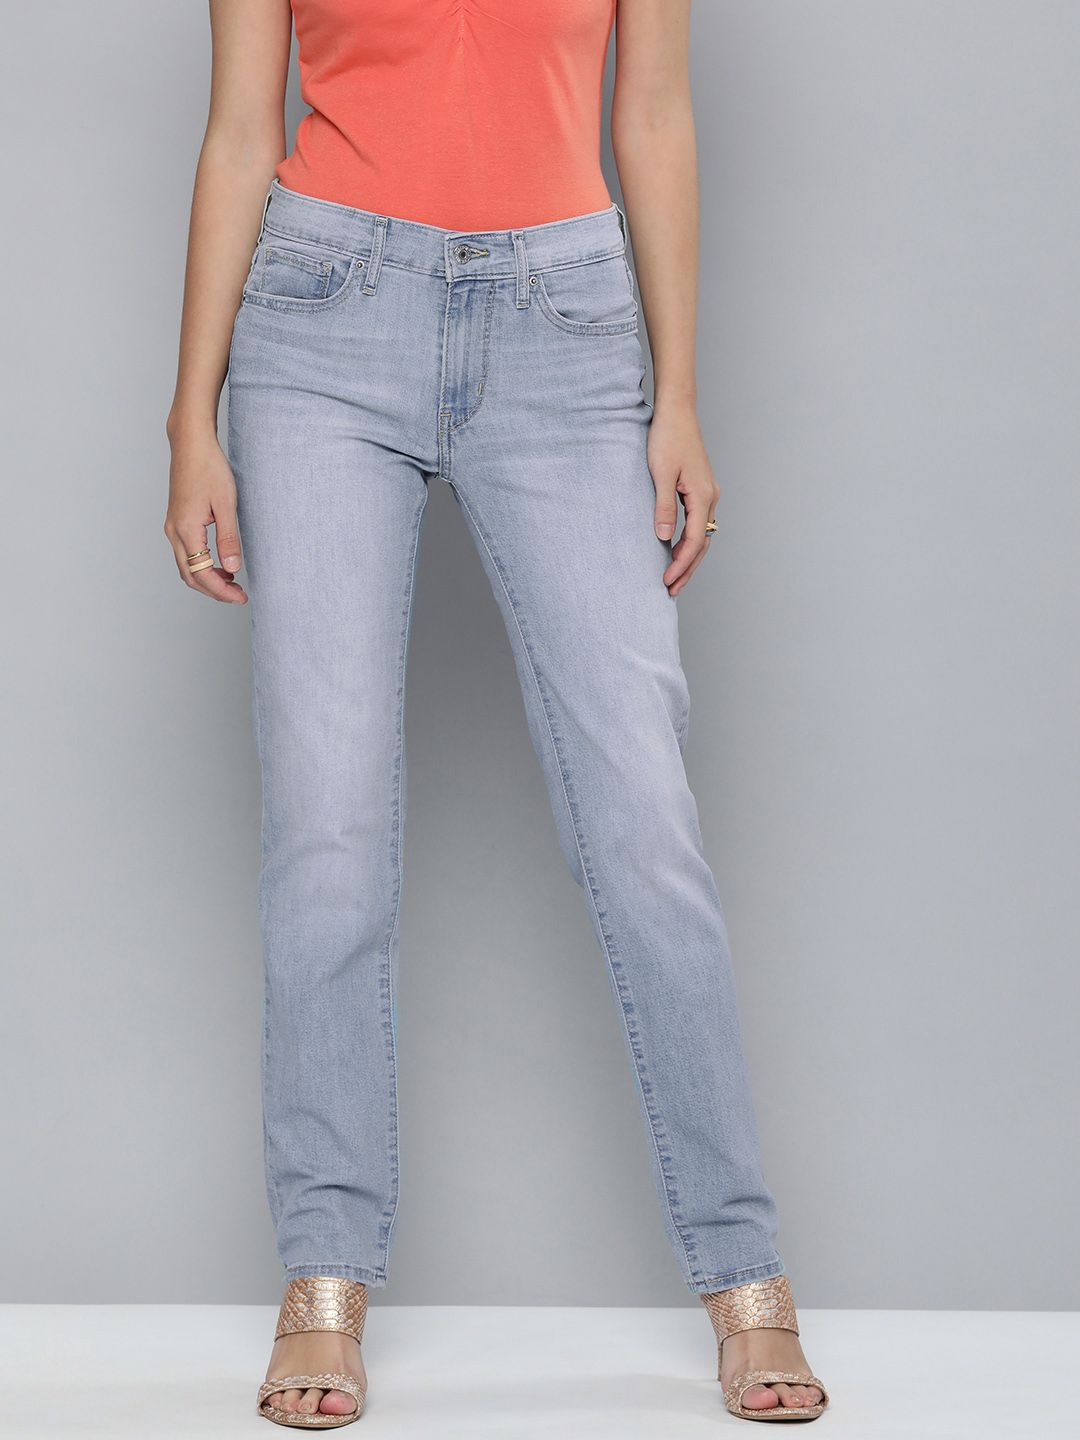 Levis Women Blue 712 Slim Fit High-Rise Light Fade Stretchable Jeans Price in India